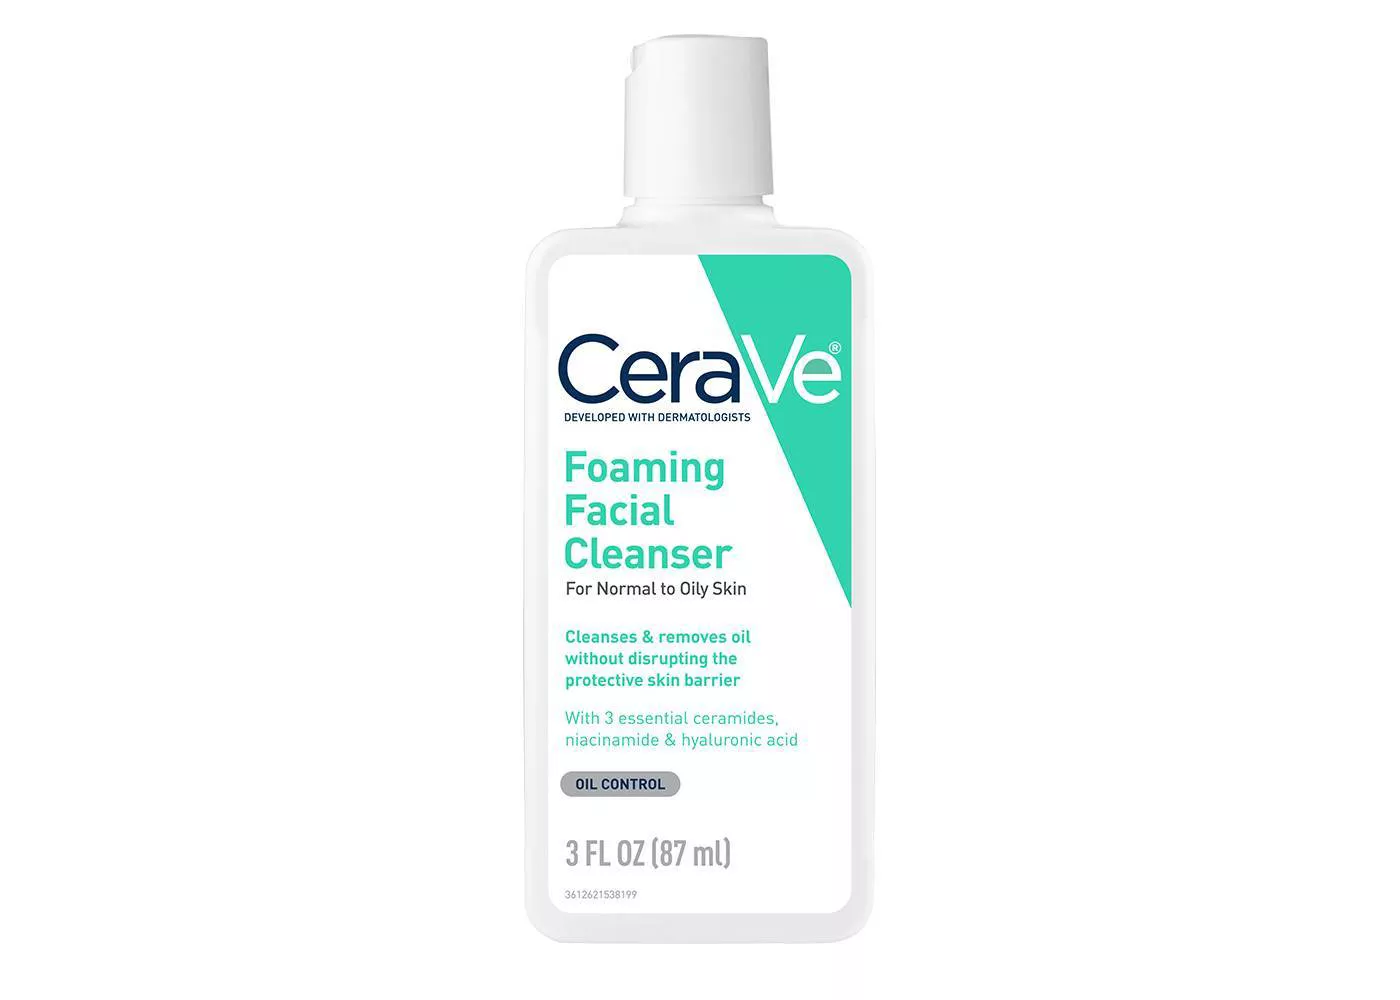 CeraVe Foaming Facial Cleanser for Normal to Oily Skin - image 1 of 8